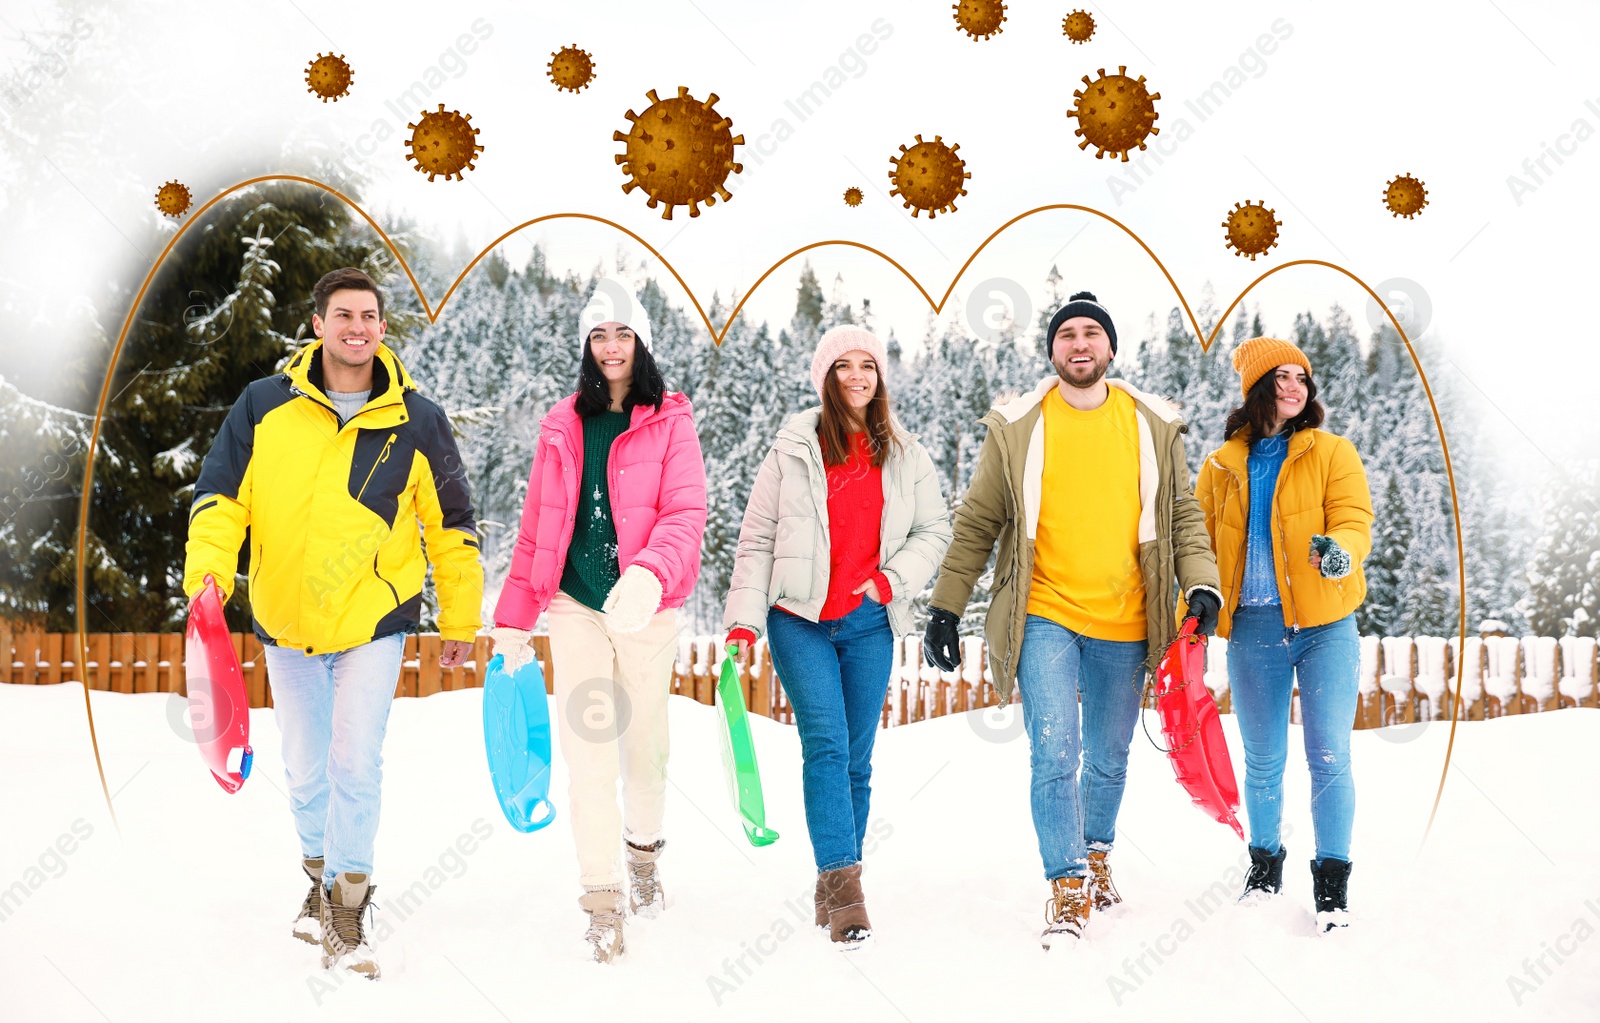 Image of Stronger immunity - better disease resistance. Group of friends surrounded by viruses outdoors